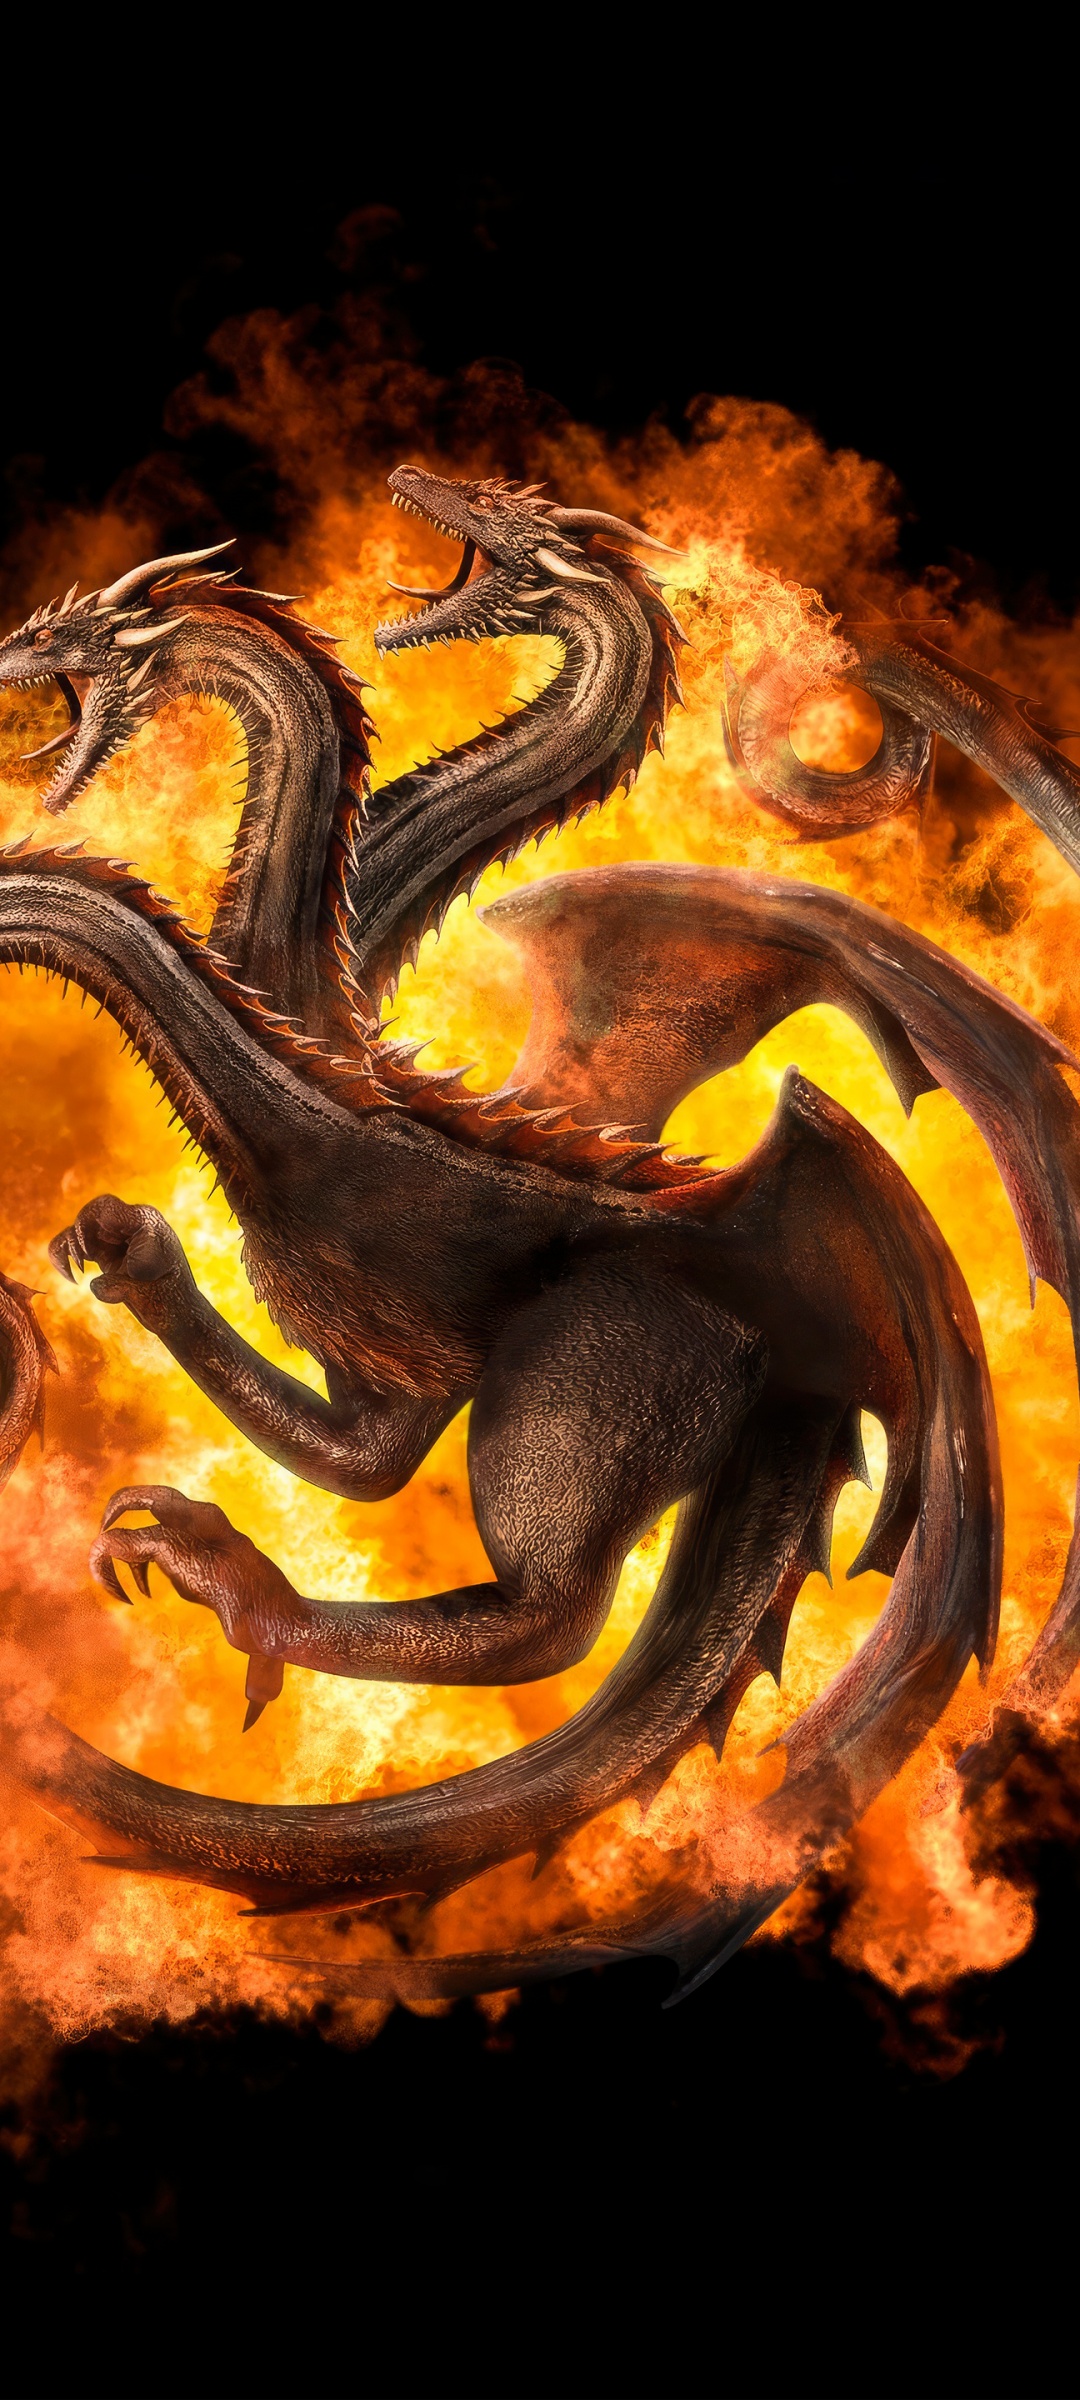 House of the Dragon Wallpaper 4K, Fire